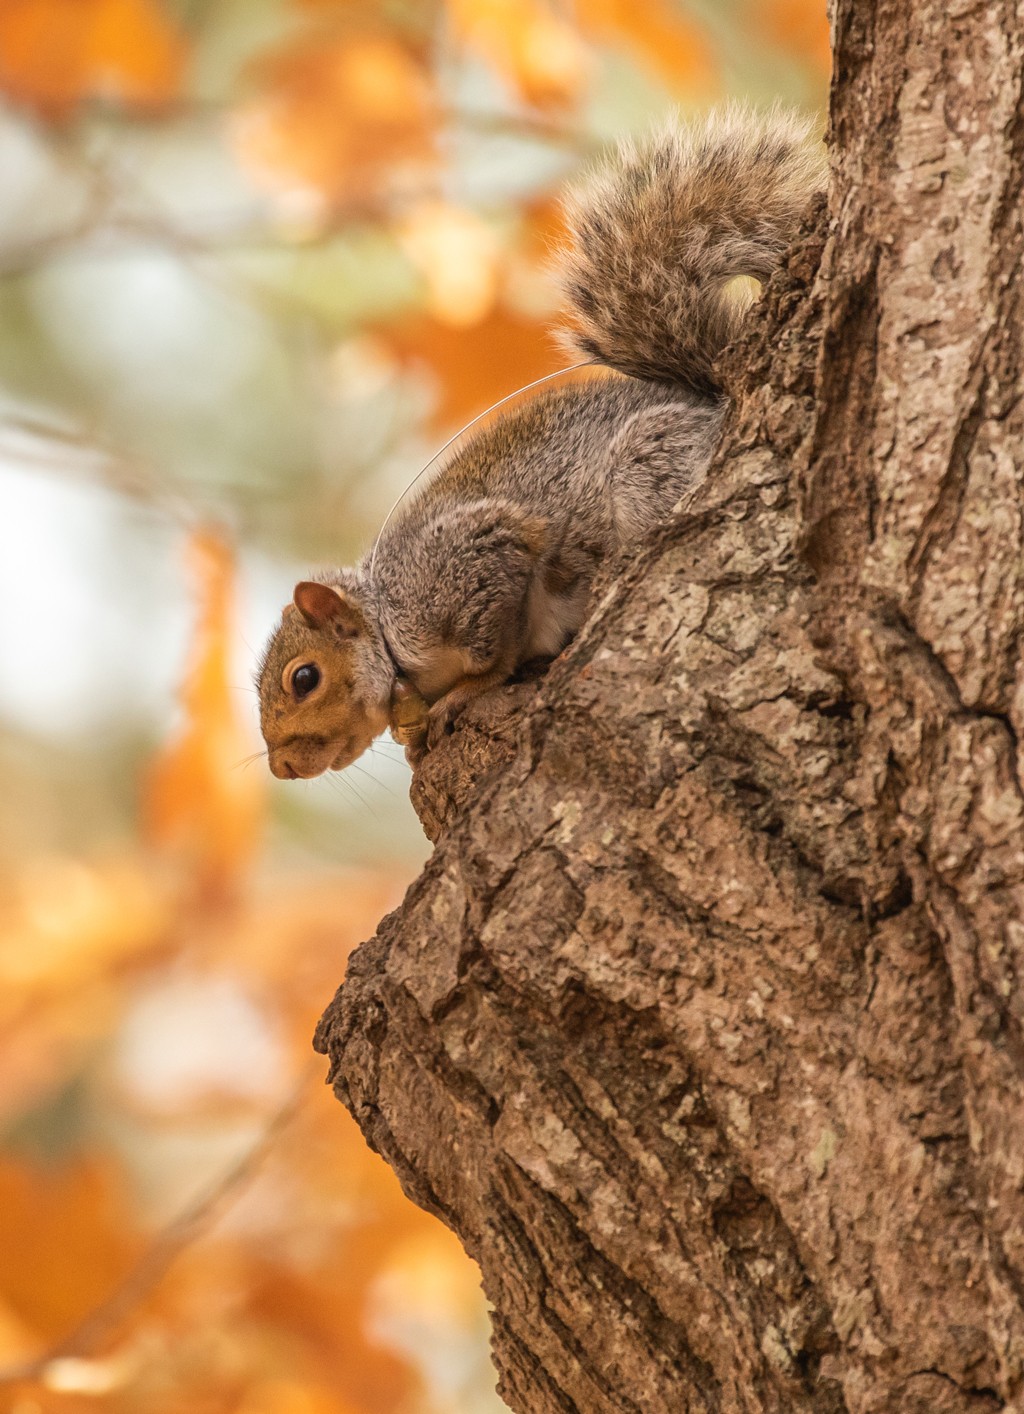 Close-up of a gray squirrel sitting on a tree